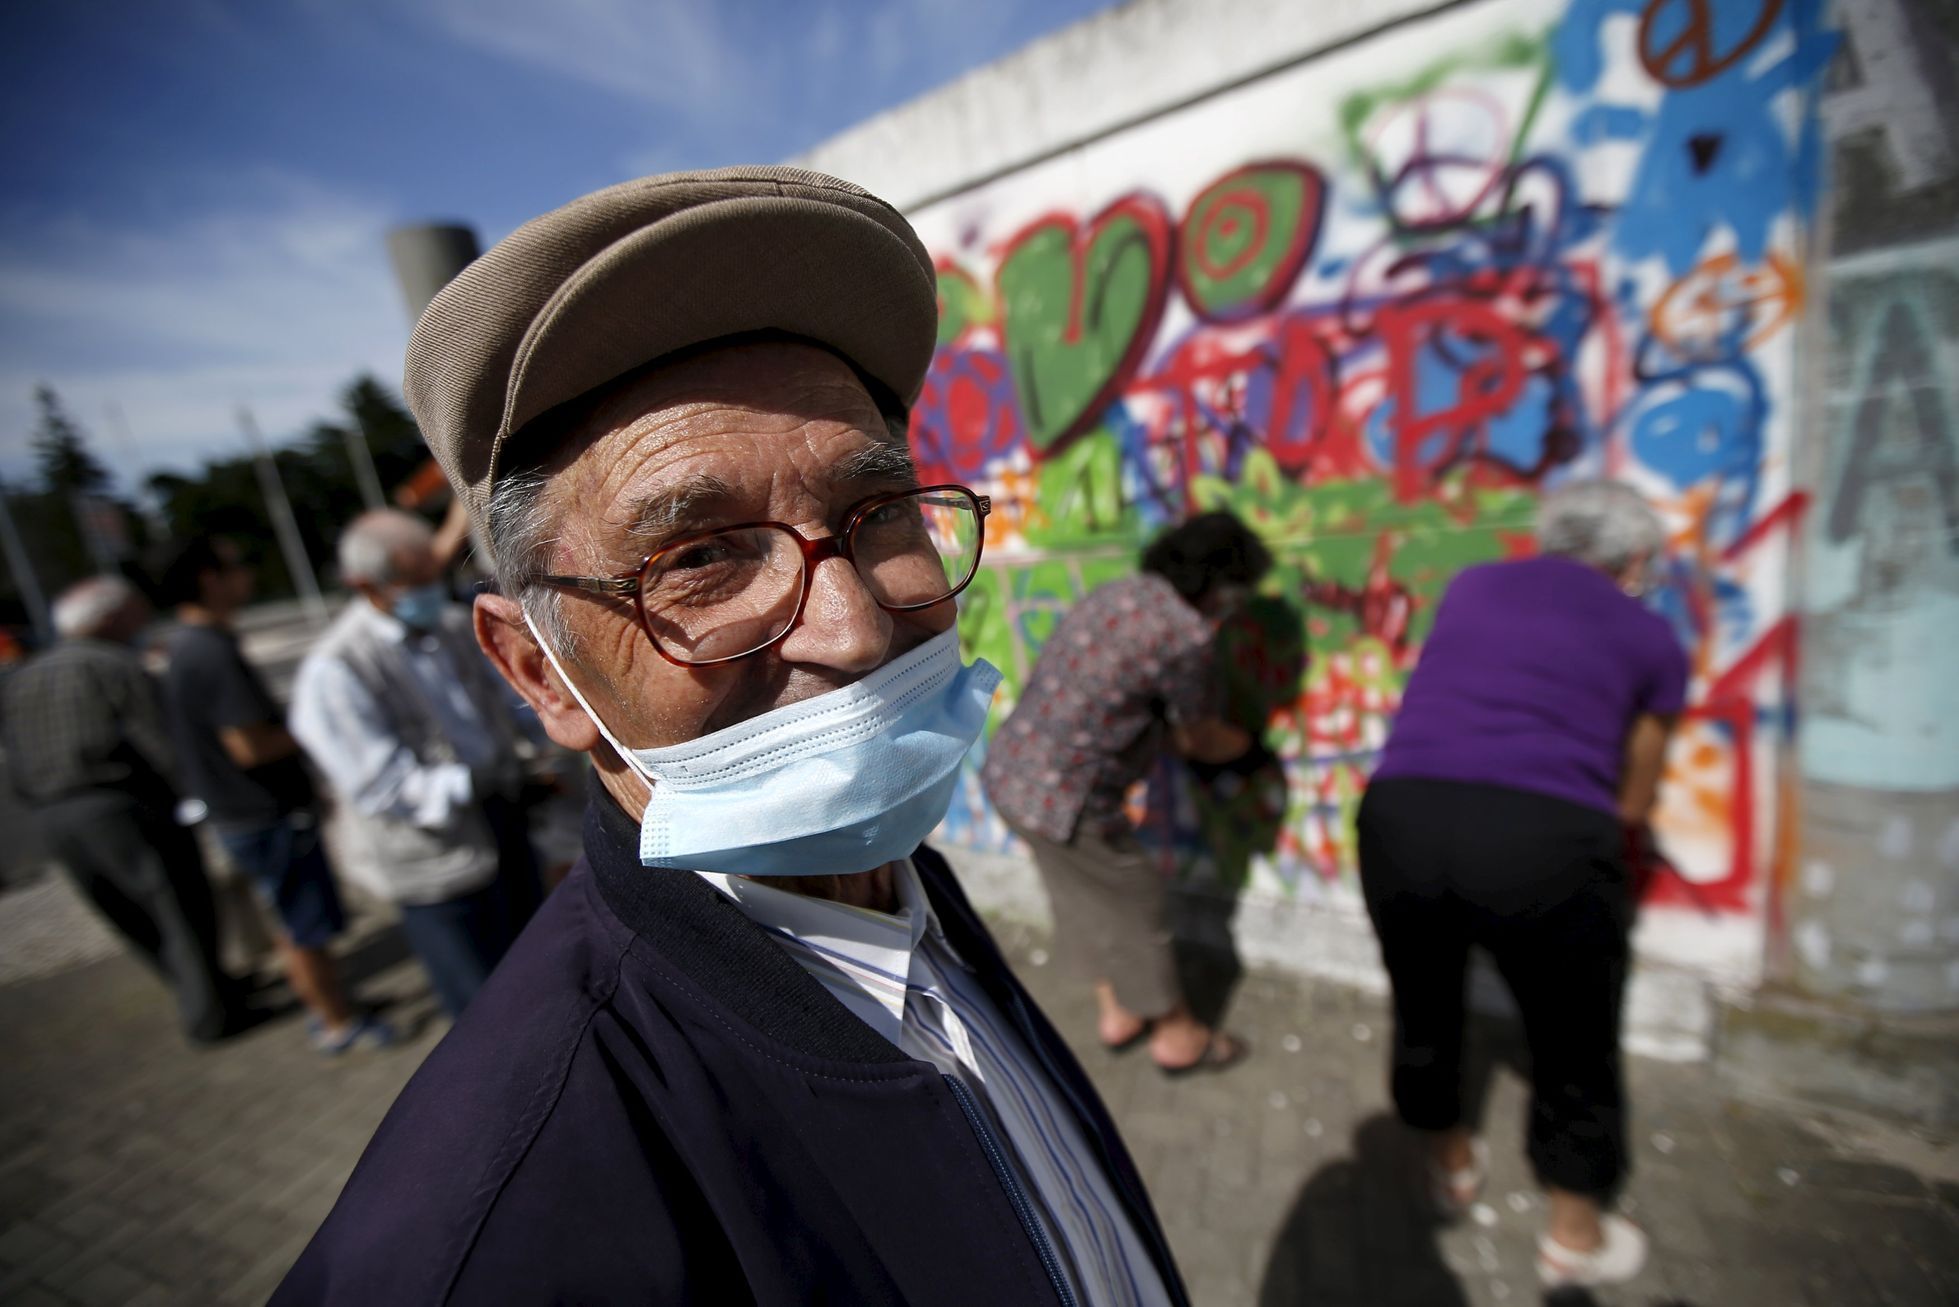 Hugo, 85, poses for a portrait during a graffiti class offered by the LATA 65 organization in Lisbon